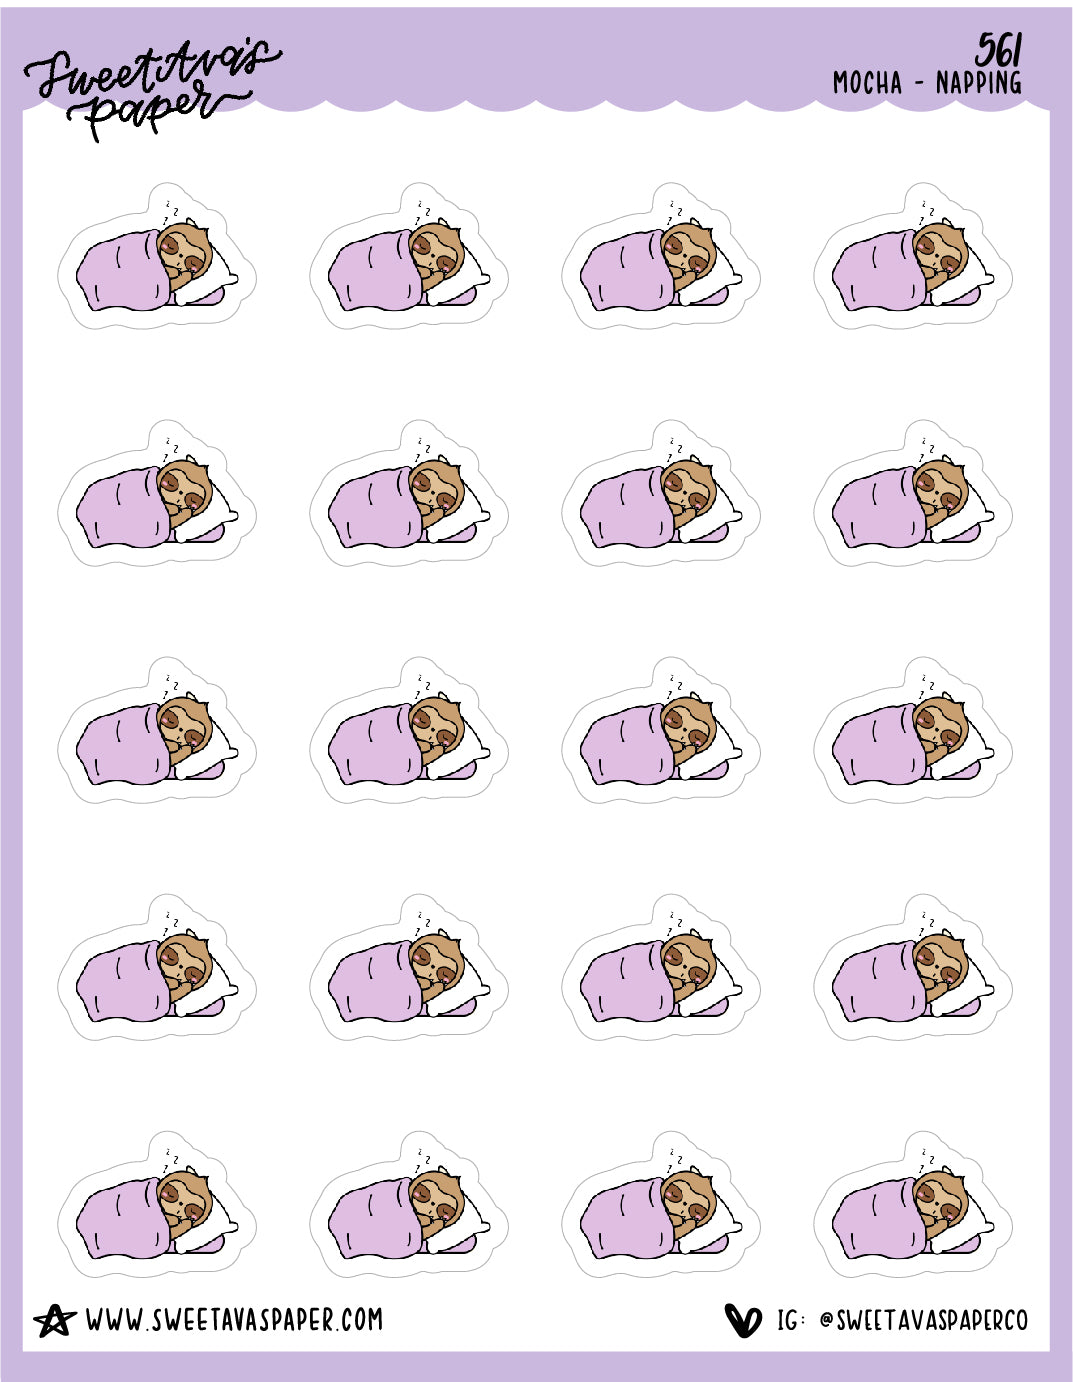 Taking A Nap Planner Stickers - Mocha The Sloth [561]